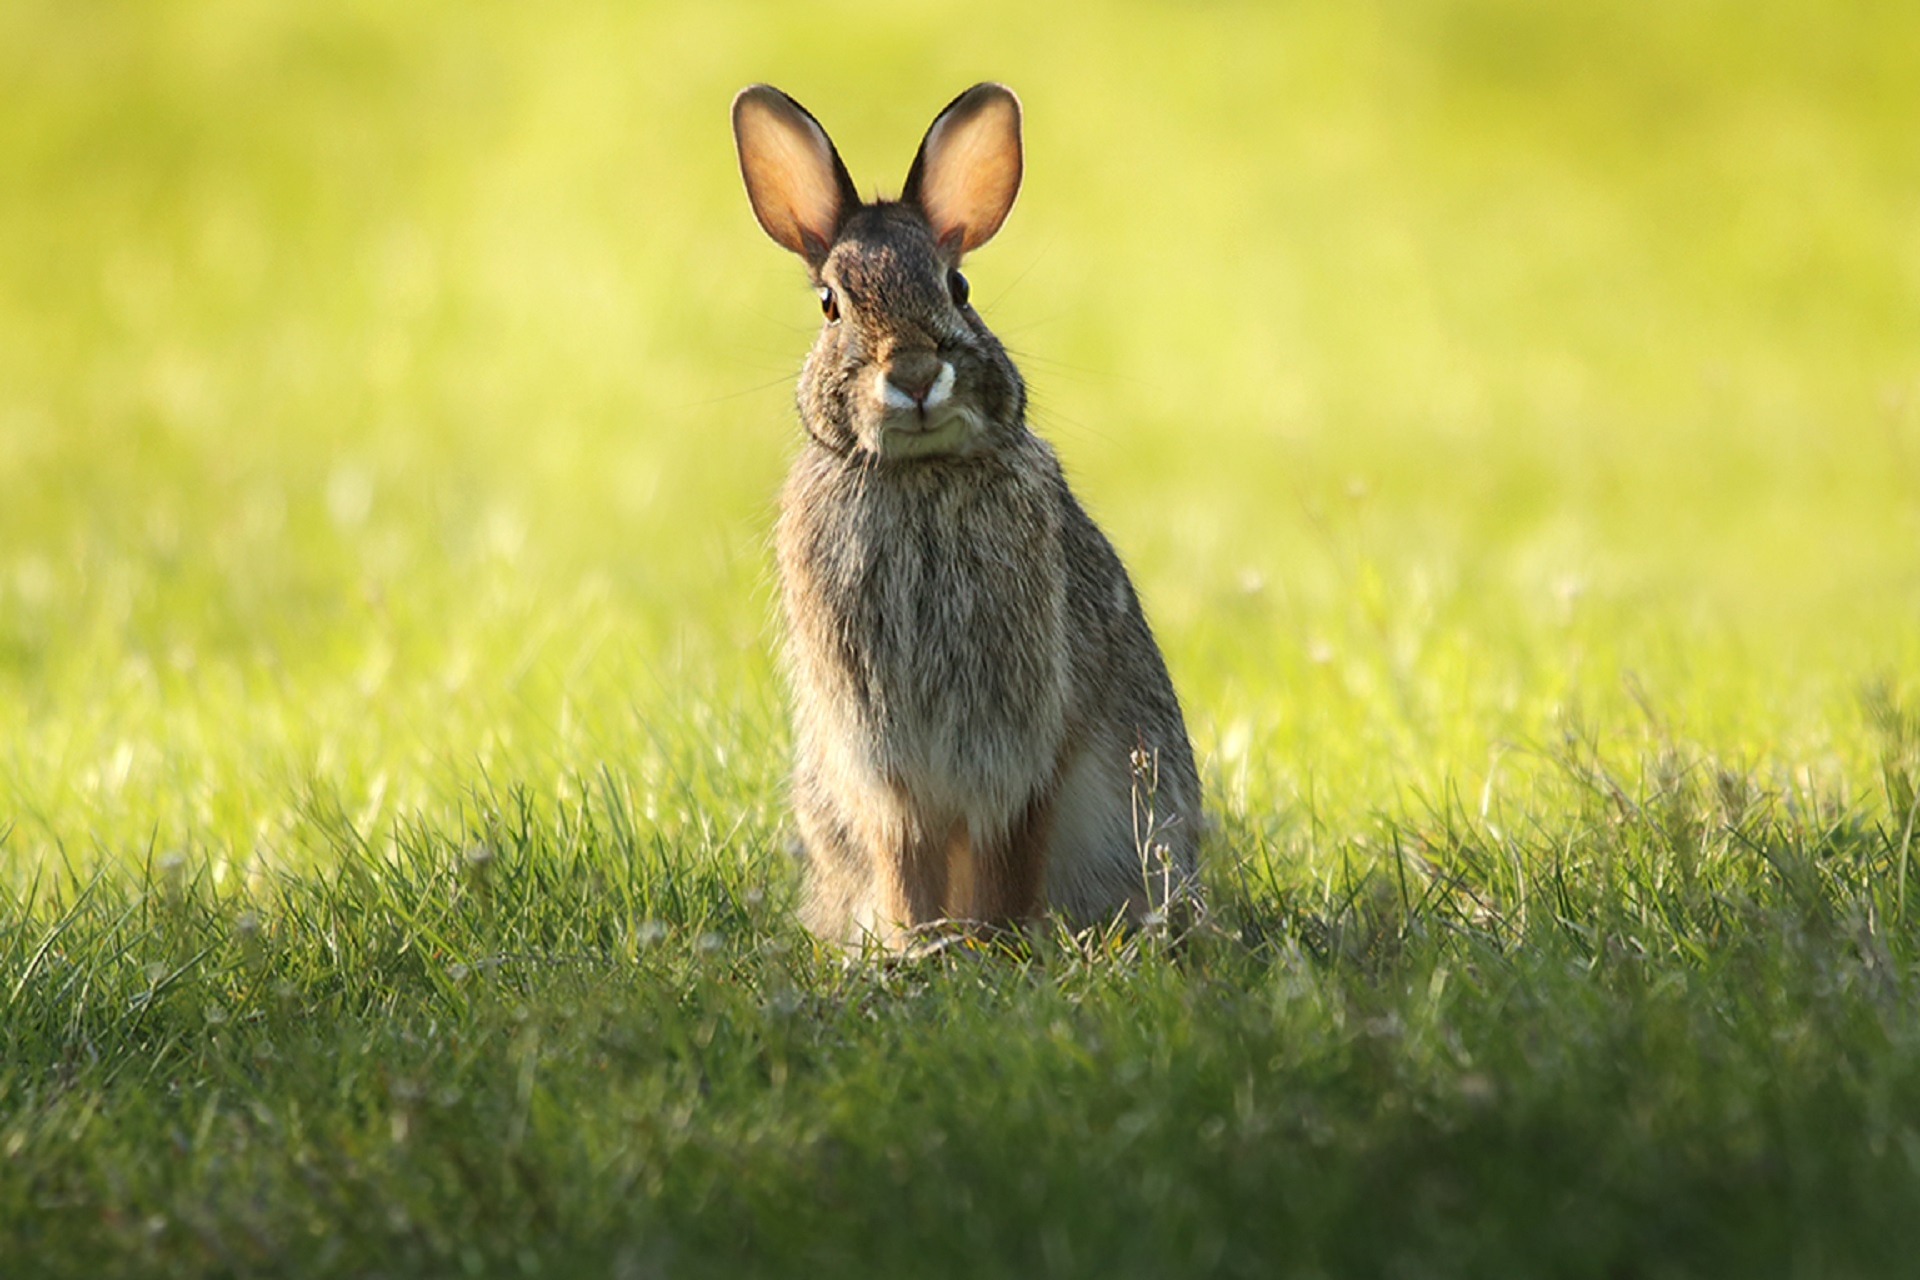 Close up view of a bunny rabbit sitting in the grass